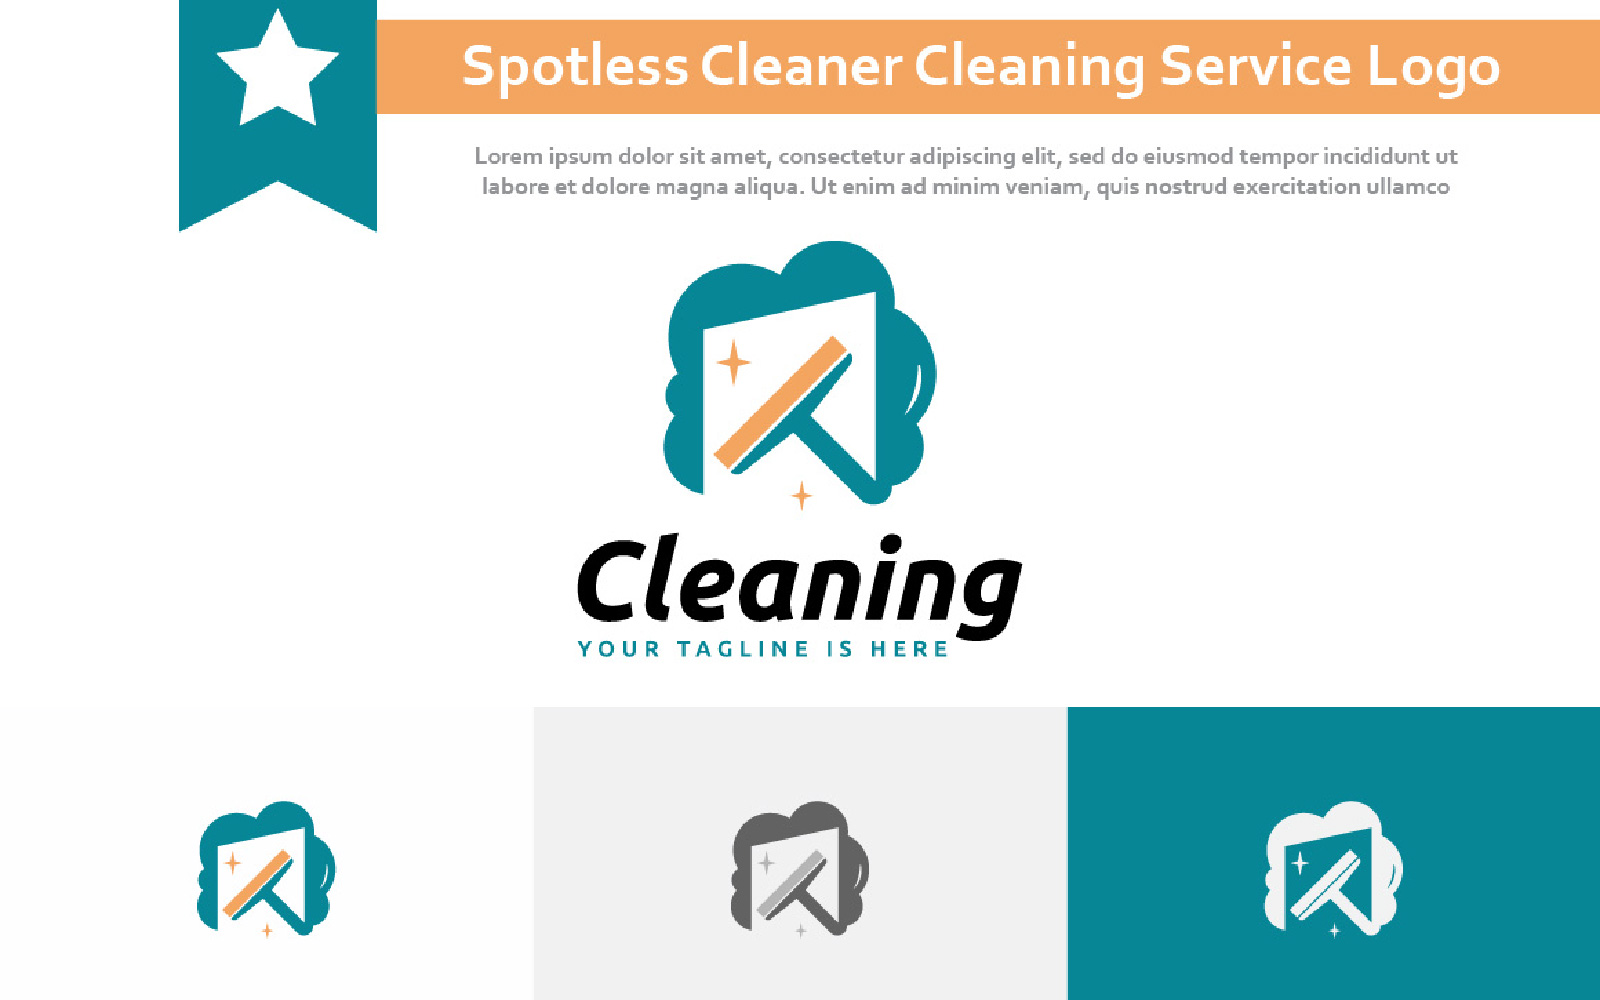 Spotless House Window Cleaner Cleaning Service Logo Template